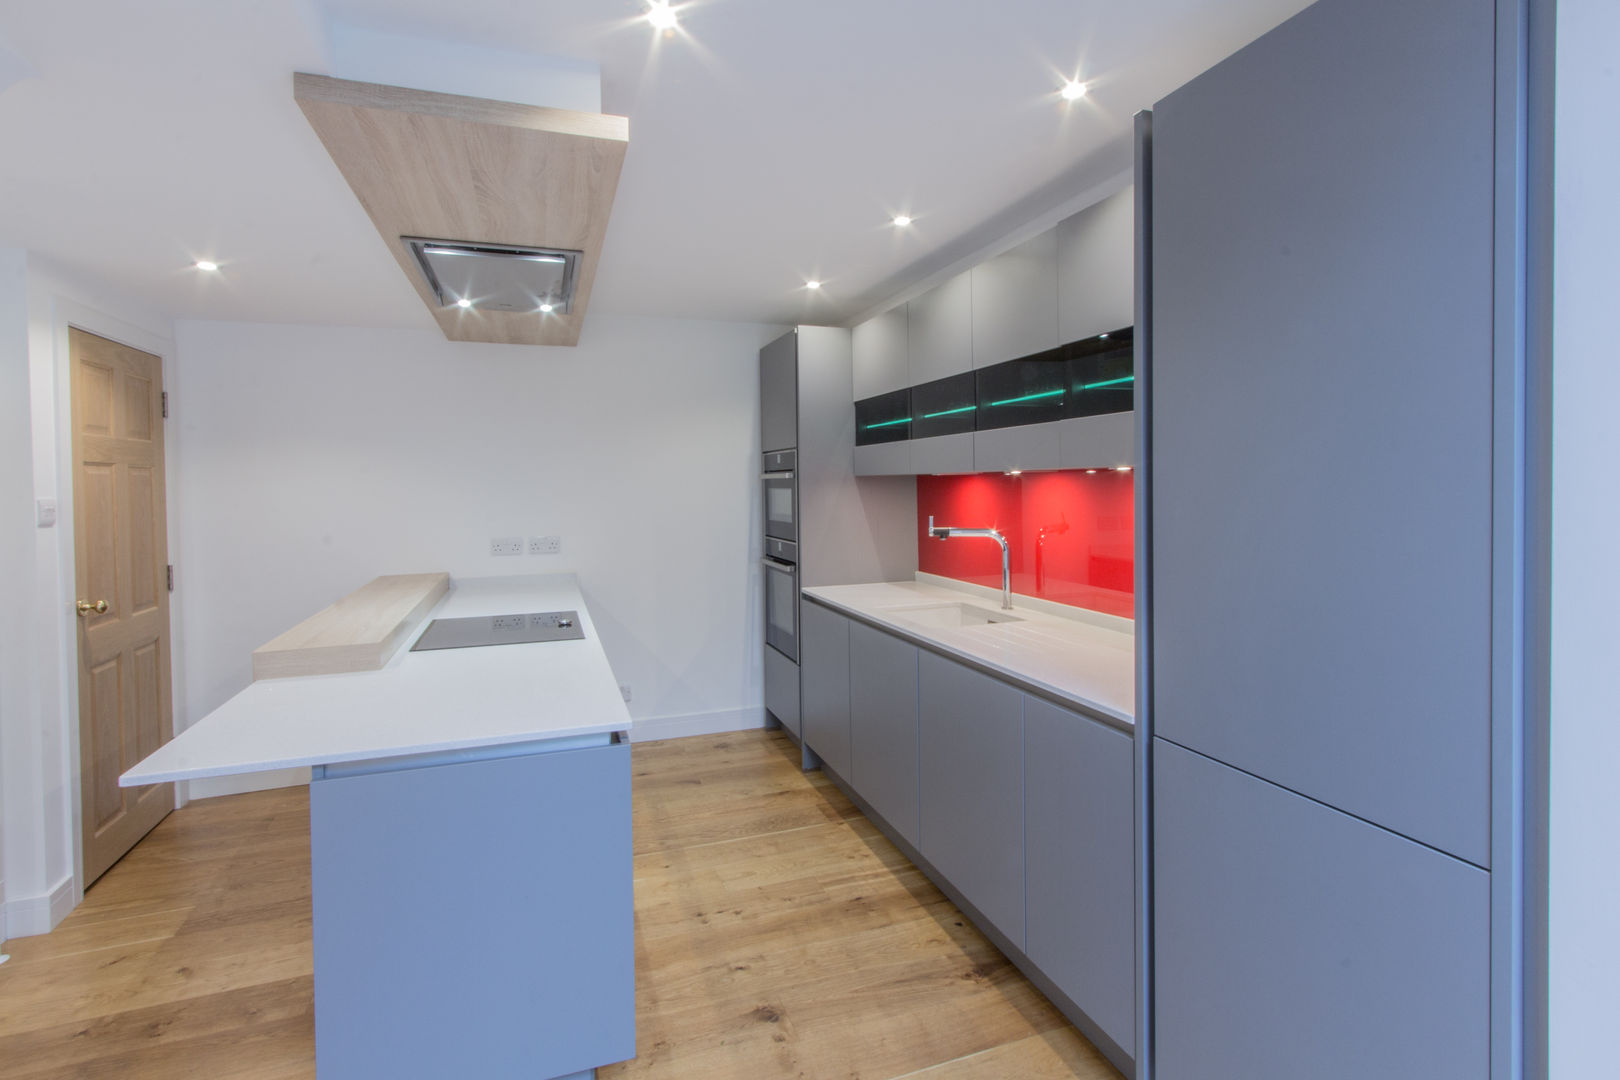 Grey & Red Eco German Kitchens Modern kitchen MDF Nobilia,Twinkle White worktops,Neff oven,Neff combination microwave,Blanco sink and tap,Neff Induction hob,open plan galley style kitchen,glazed wall units